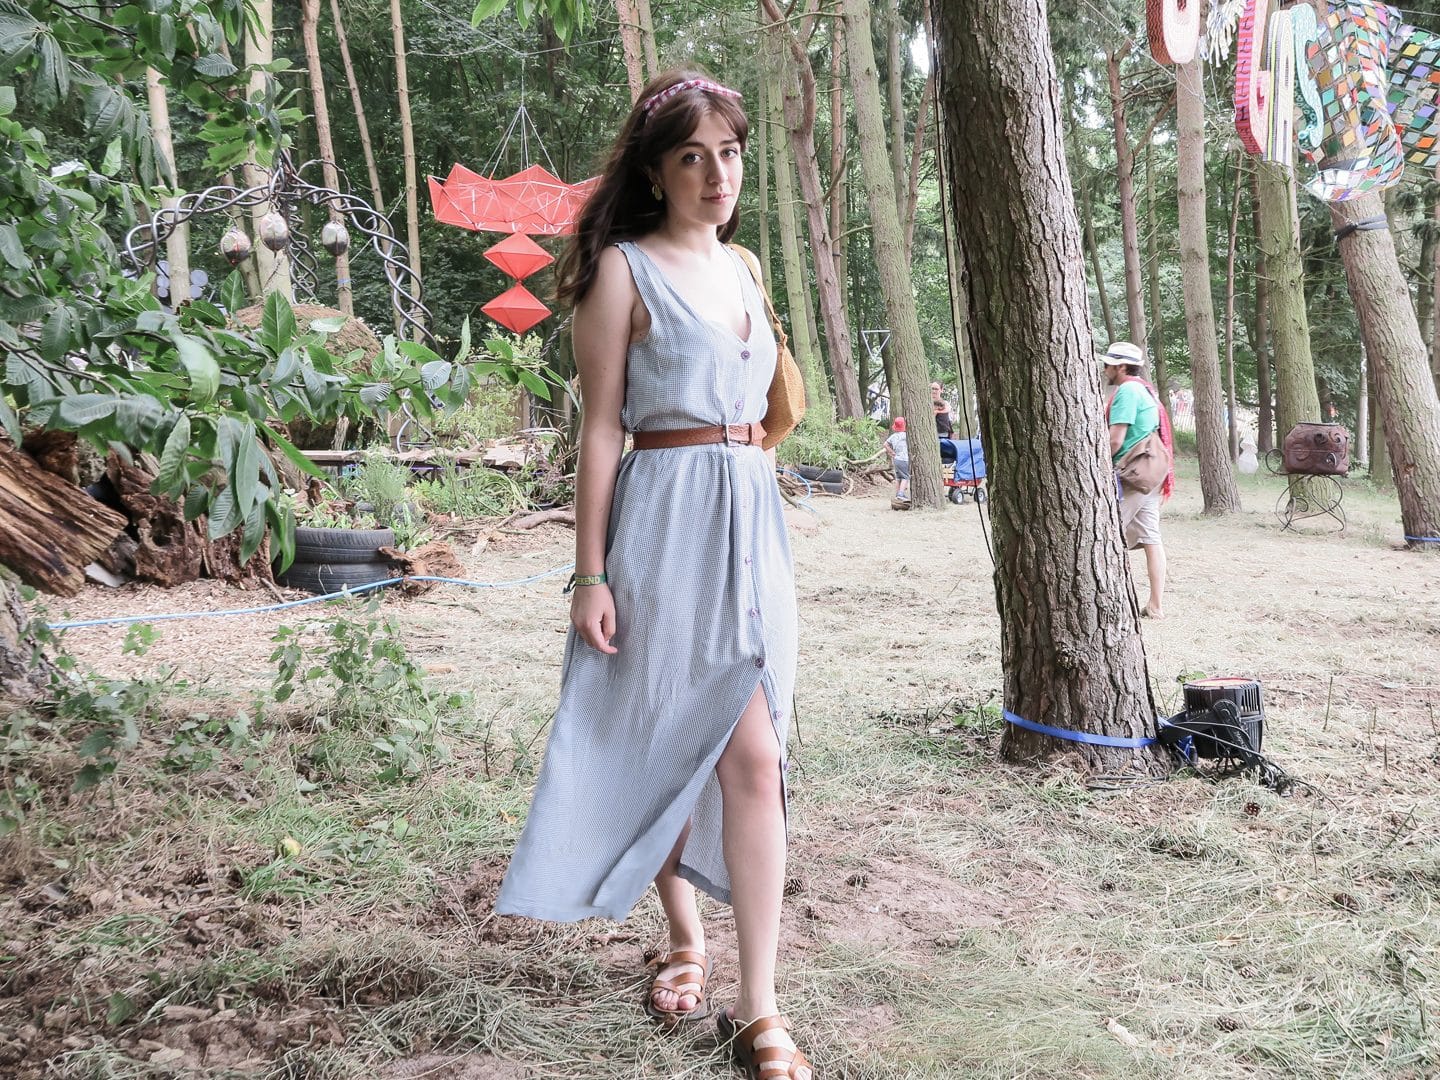 Besma stands in a forest in a blue dress with brown belt